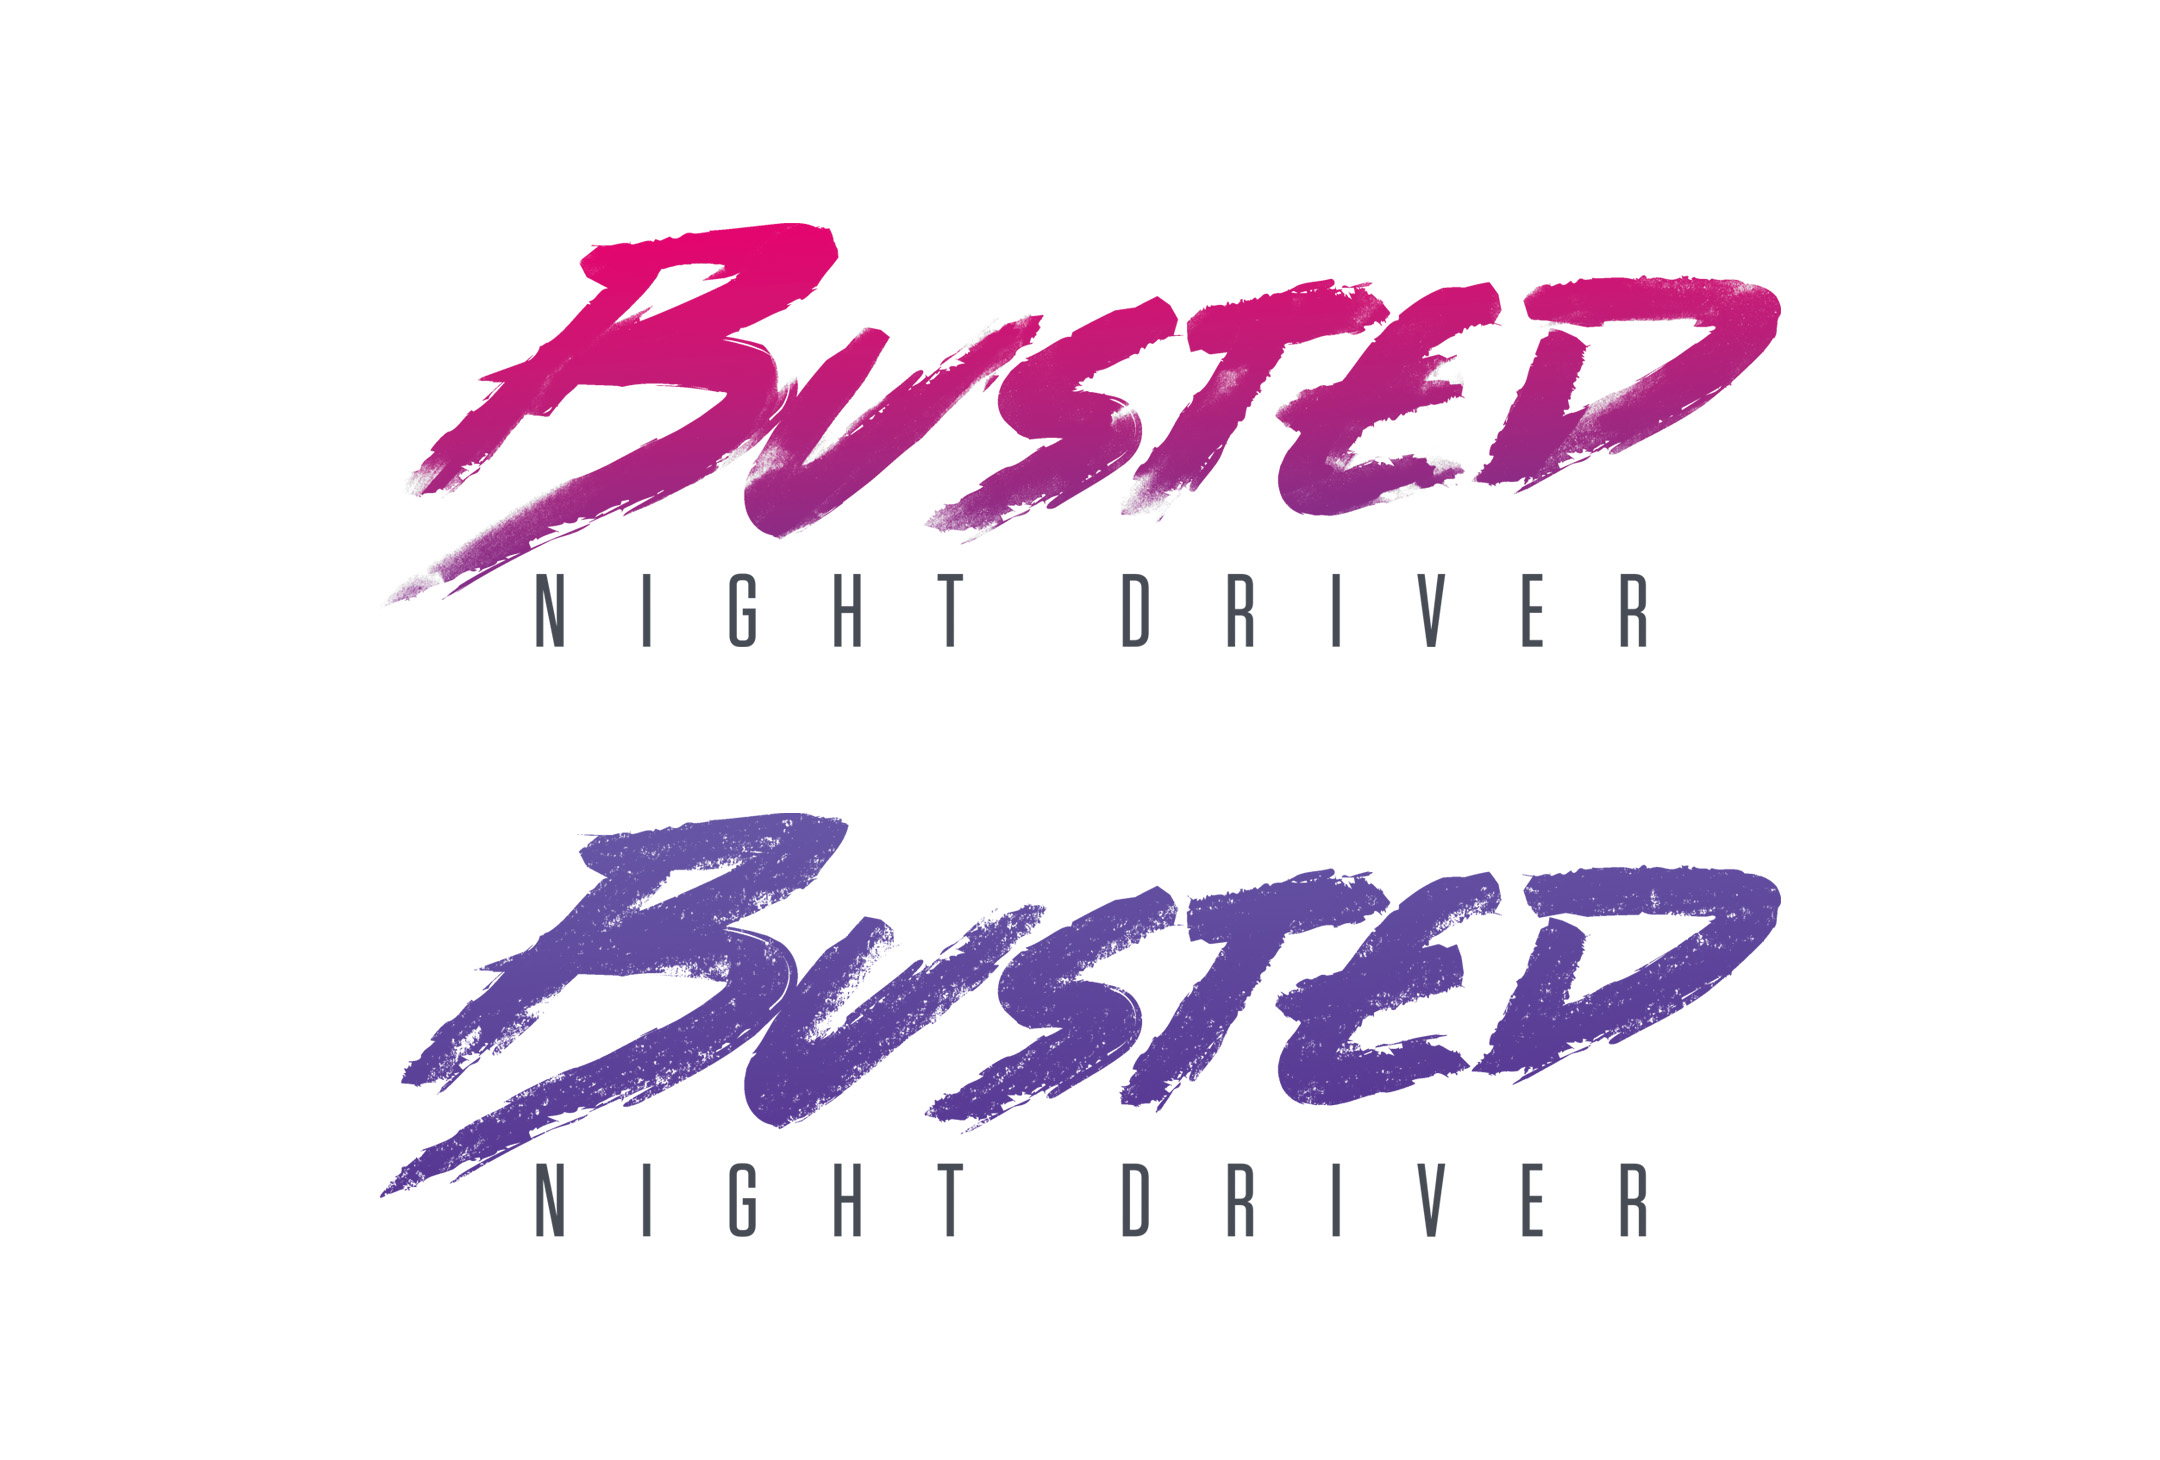 ZIP_BUSTED_NEWS1-2_0002_logo